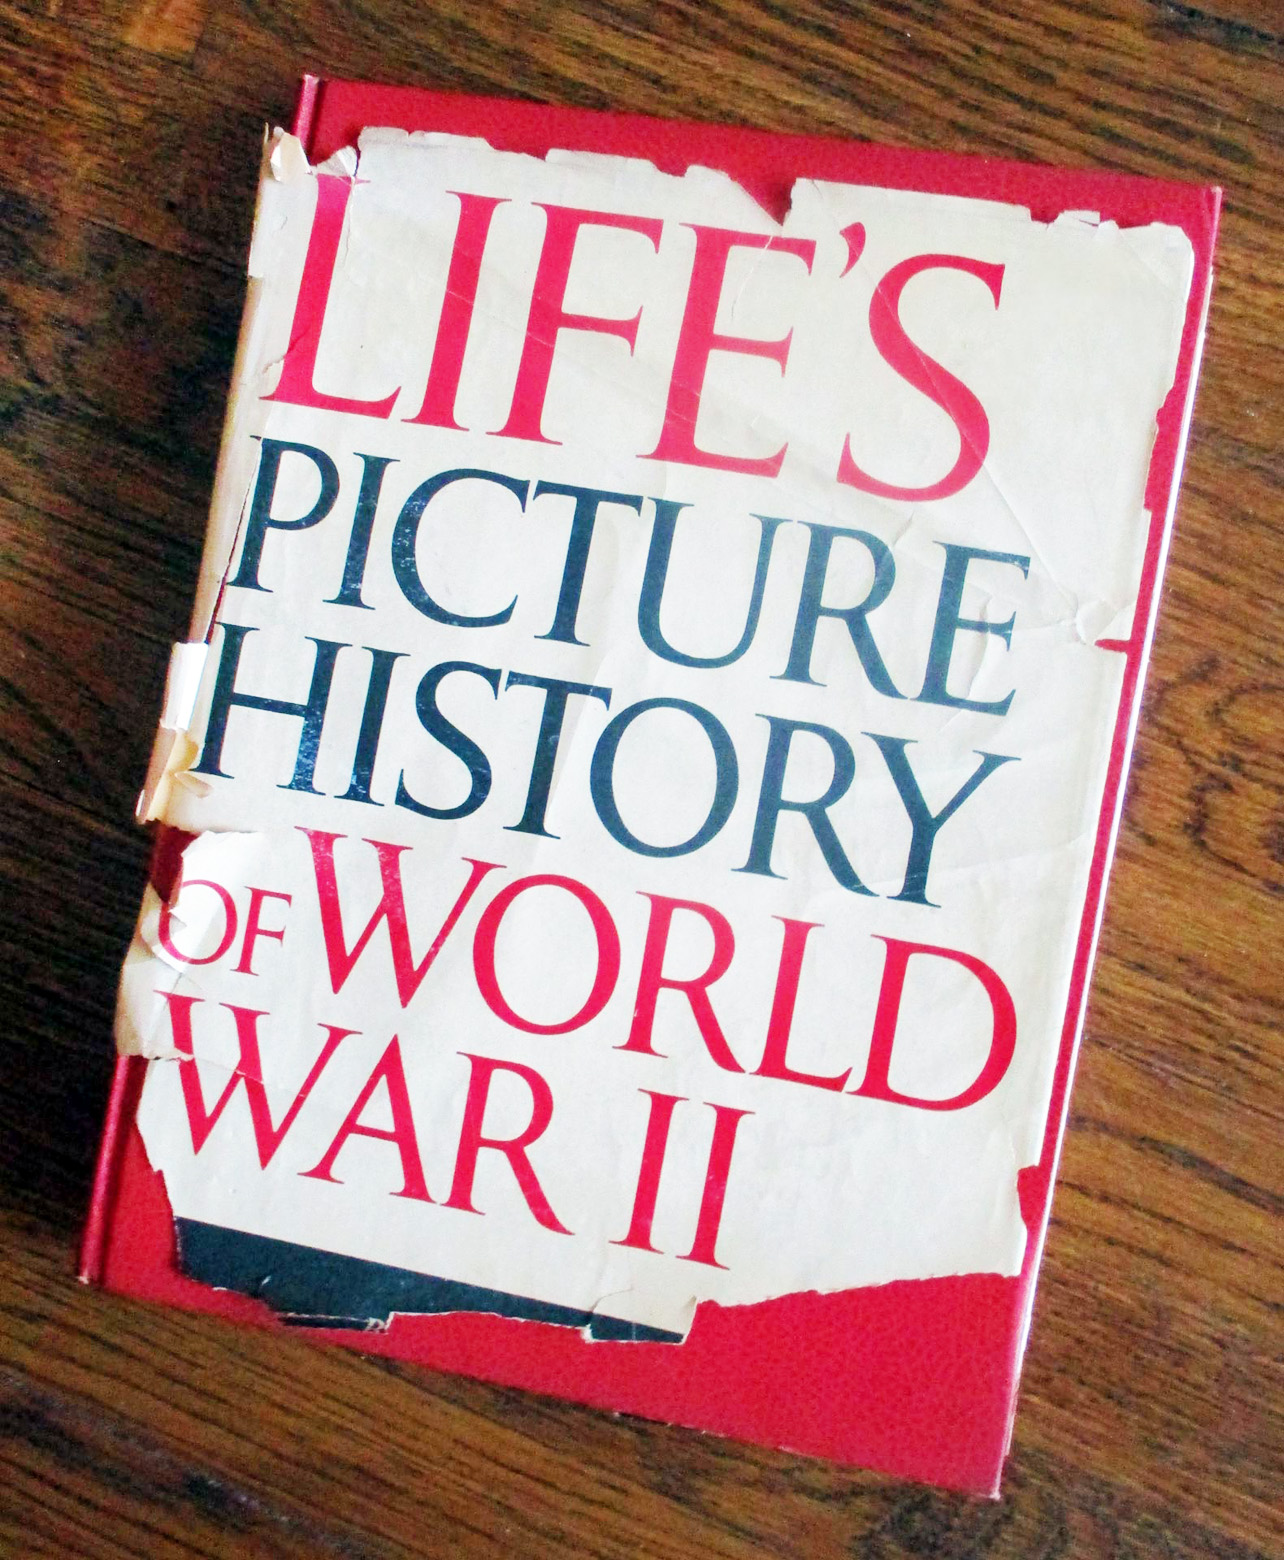 LIFE's Picture History of World War II